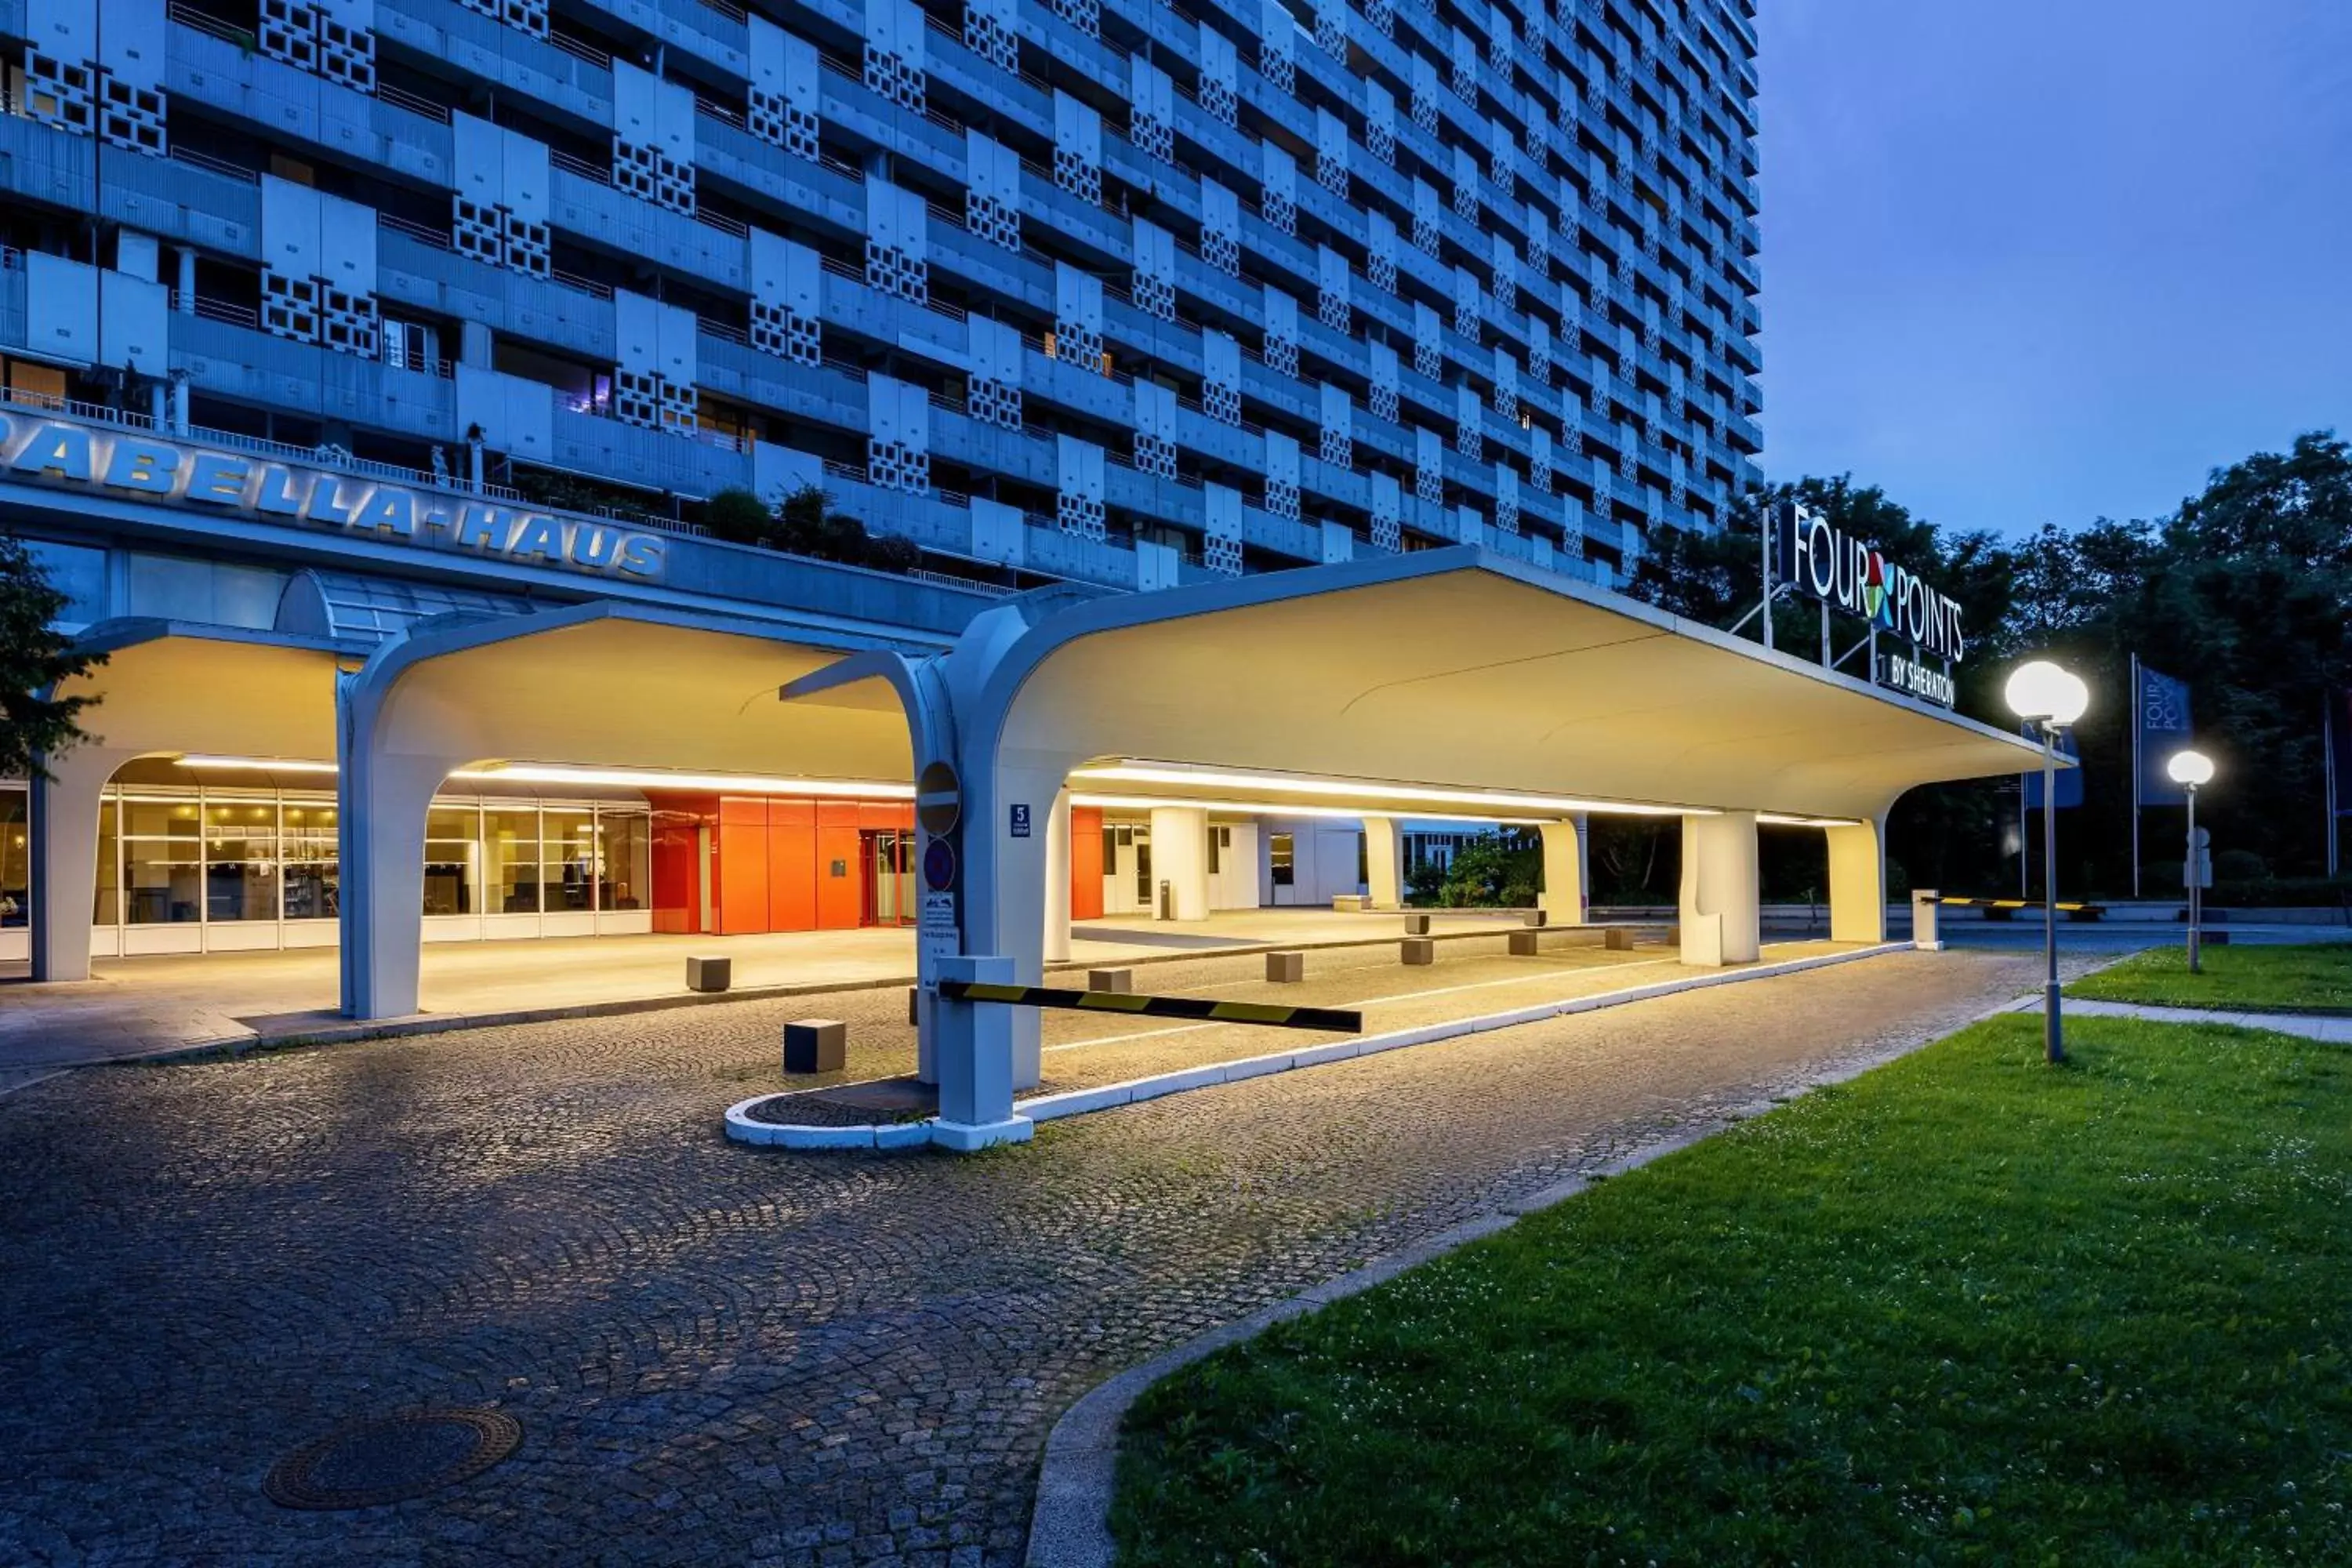 Property Building in Four Points by Sheraton Munich Arabellapark